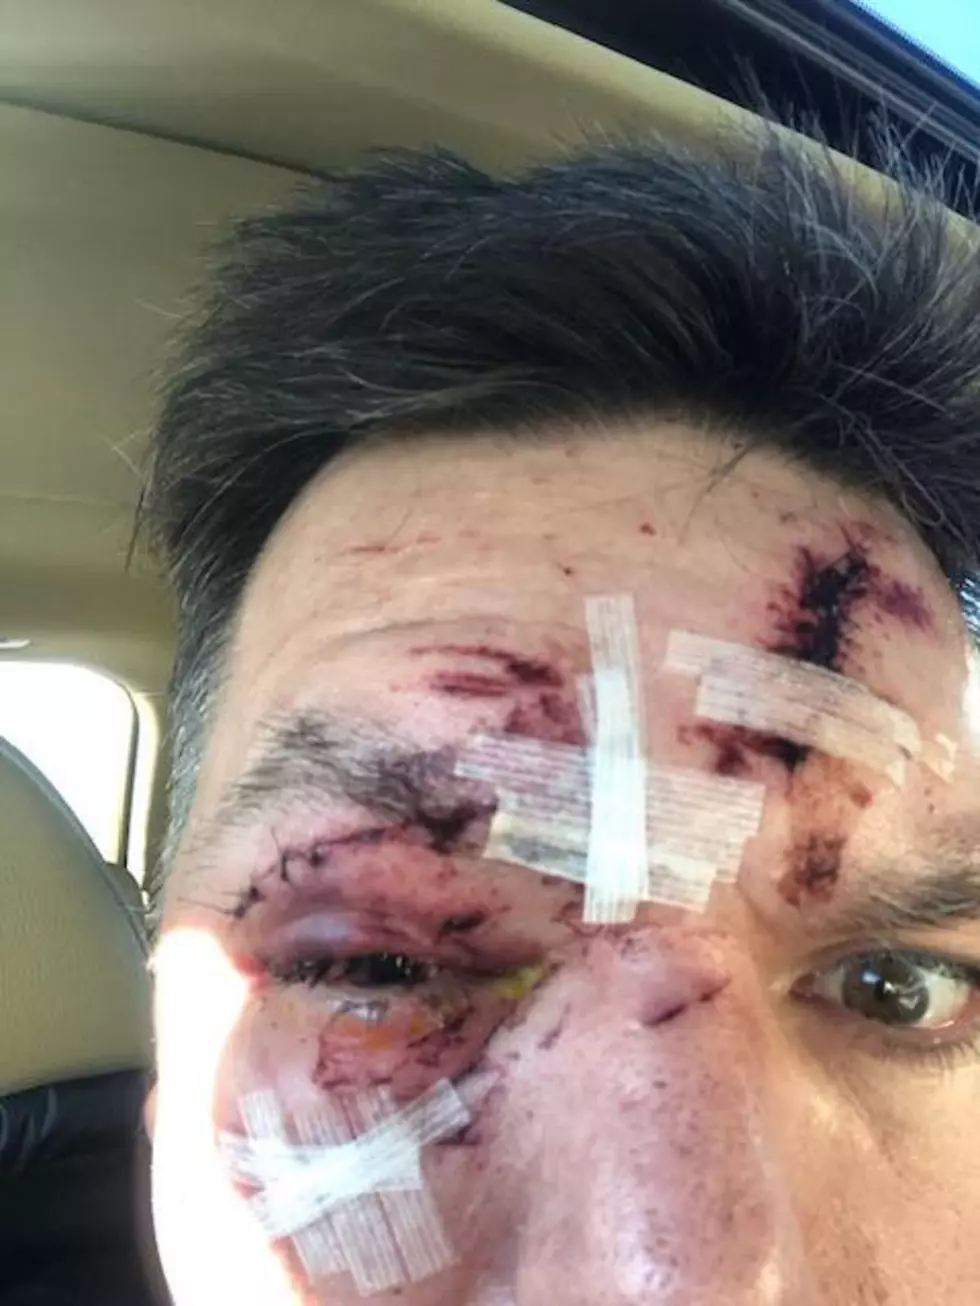 Man Shares Gruesome Injuries to Warn Others to Clear Ice Off Cars